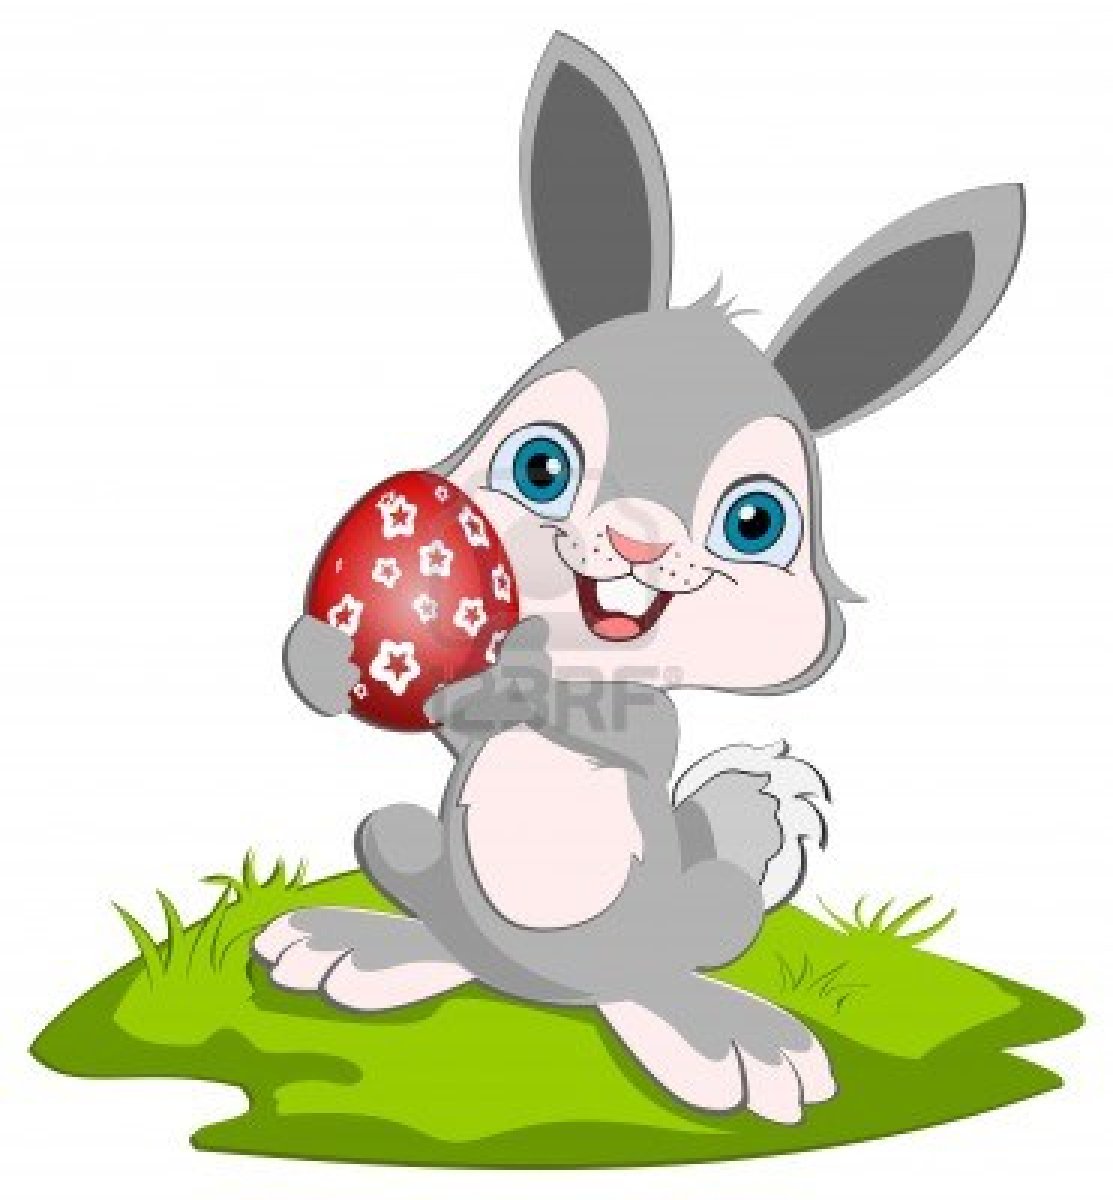 12980013 Easter Bunny Holding O Rad Easter Egg And Smiling